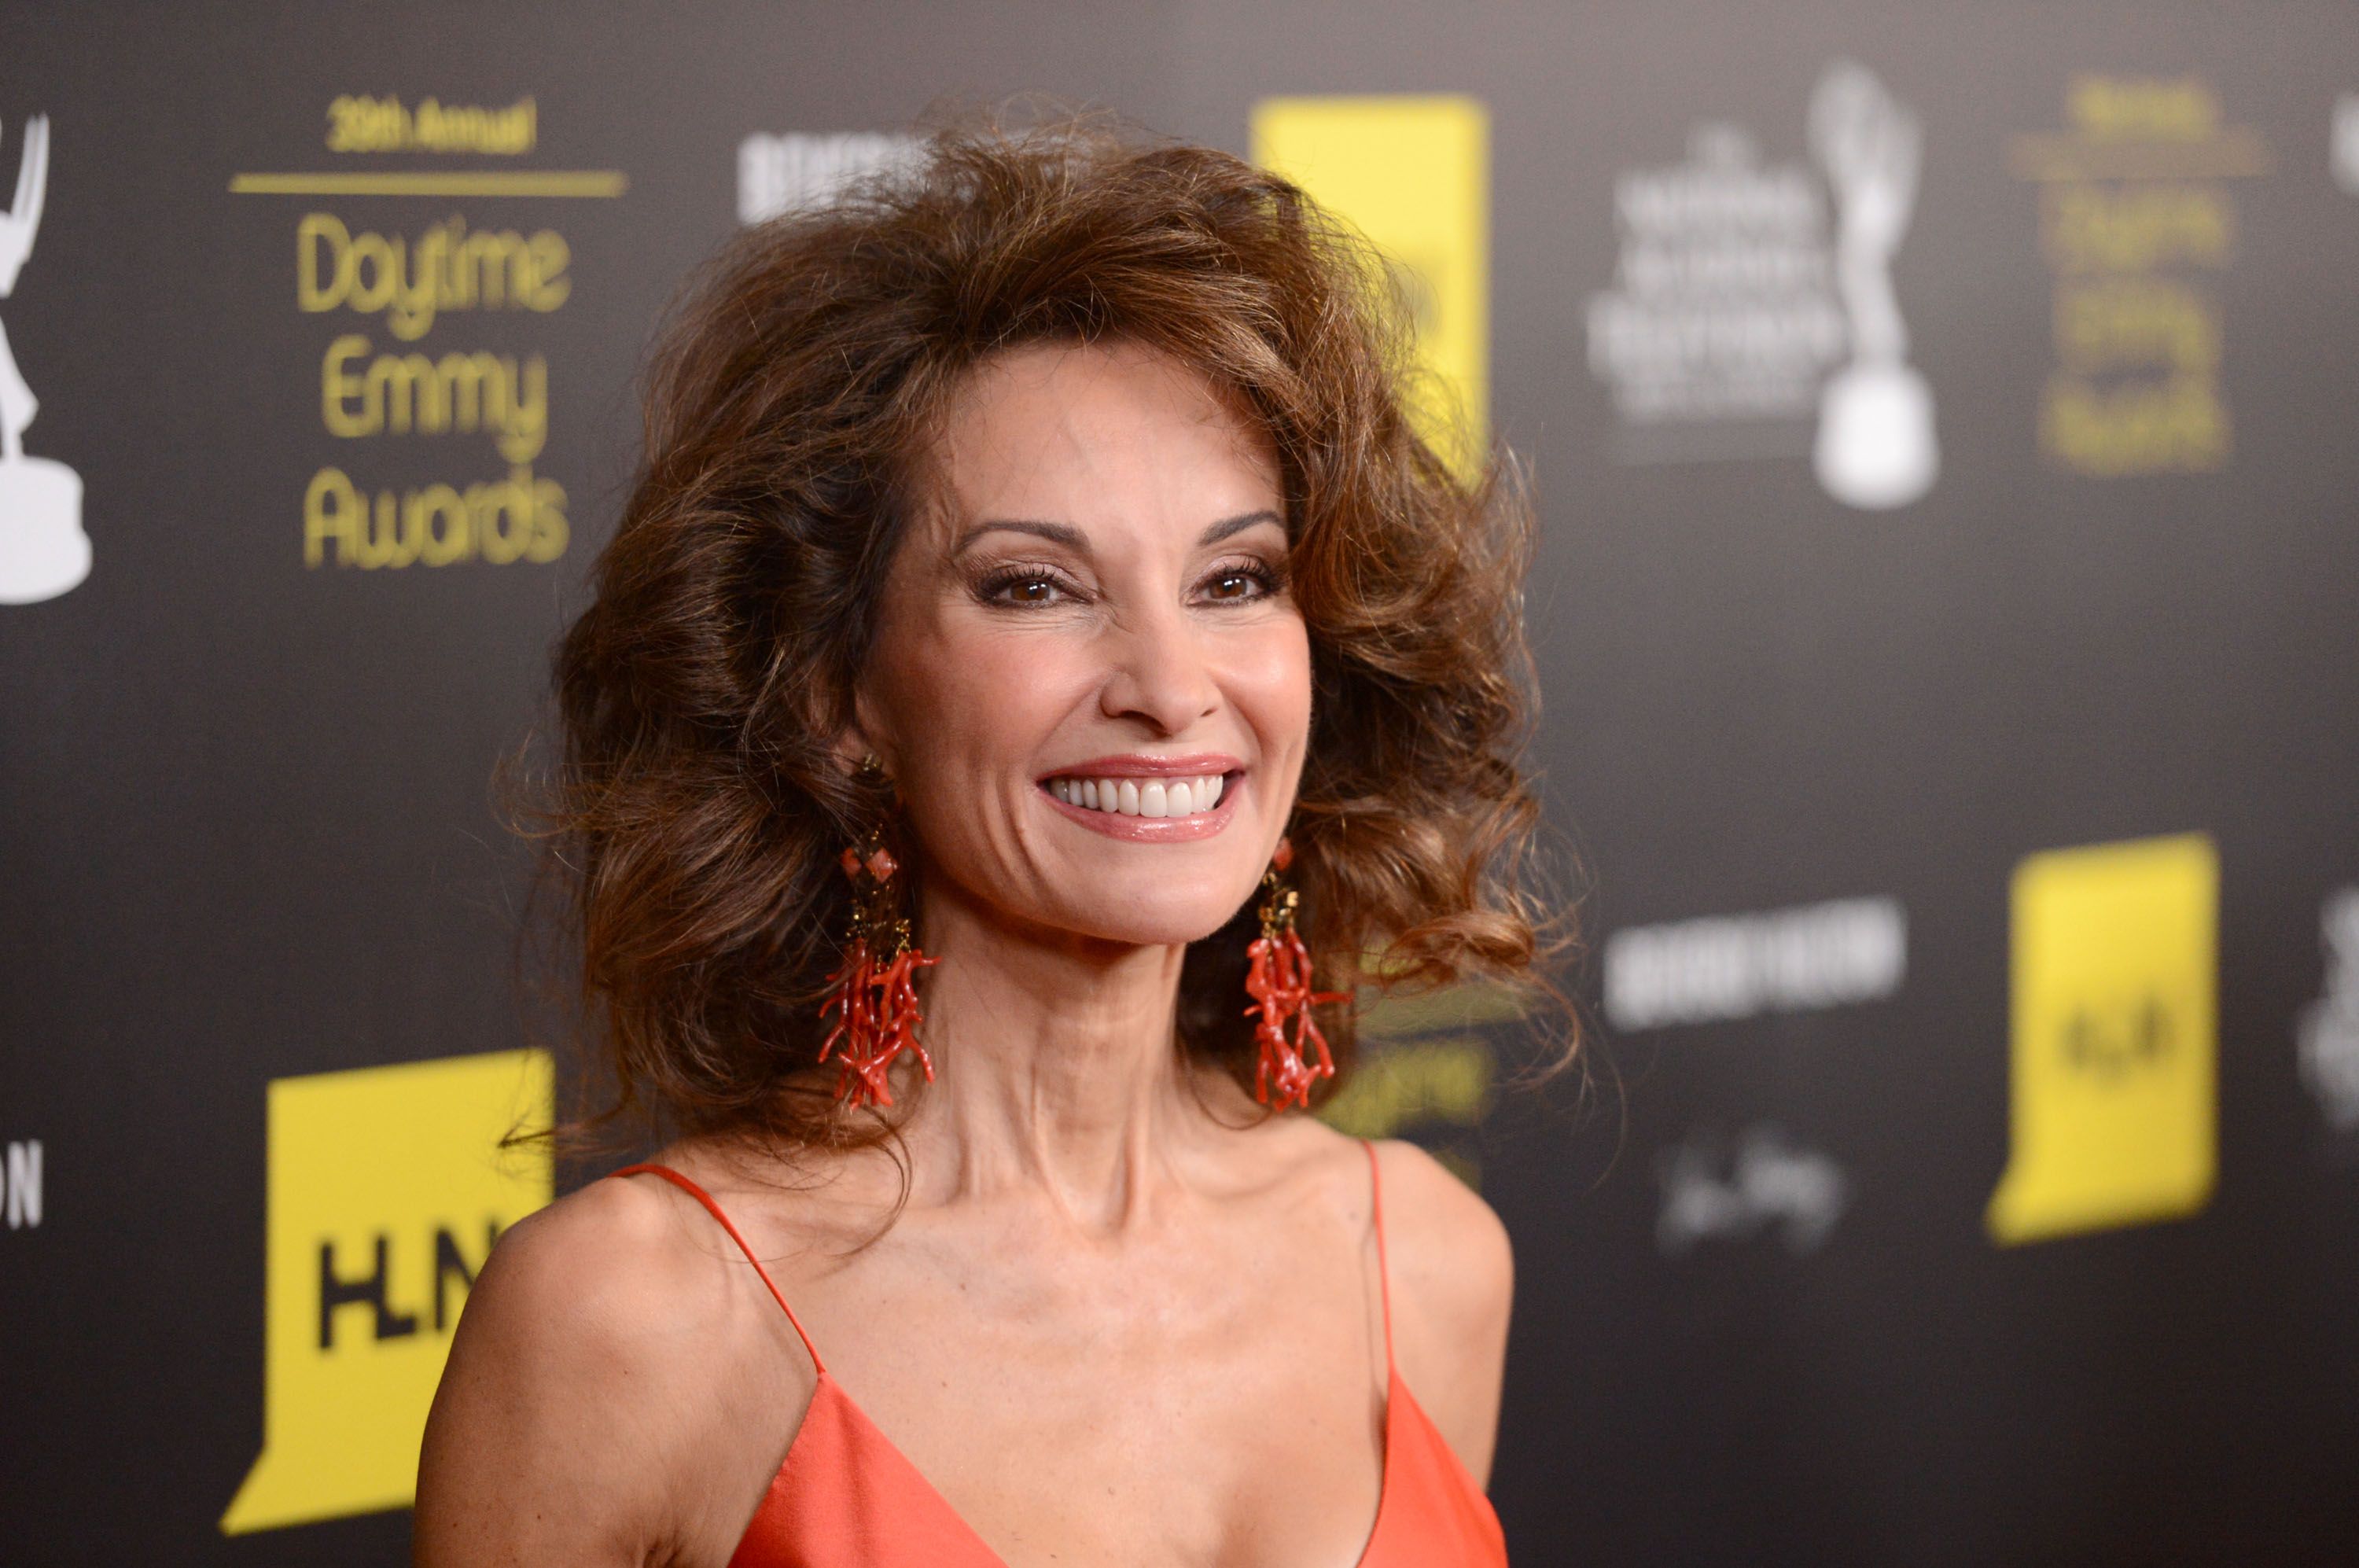 Susan Lucci at the 39th Annual Daytime Emmy Awards on June 23, 2012, in Beverly Hills, California | Photo: Jason Merritt/WireImage/Getty Images